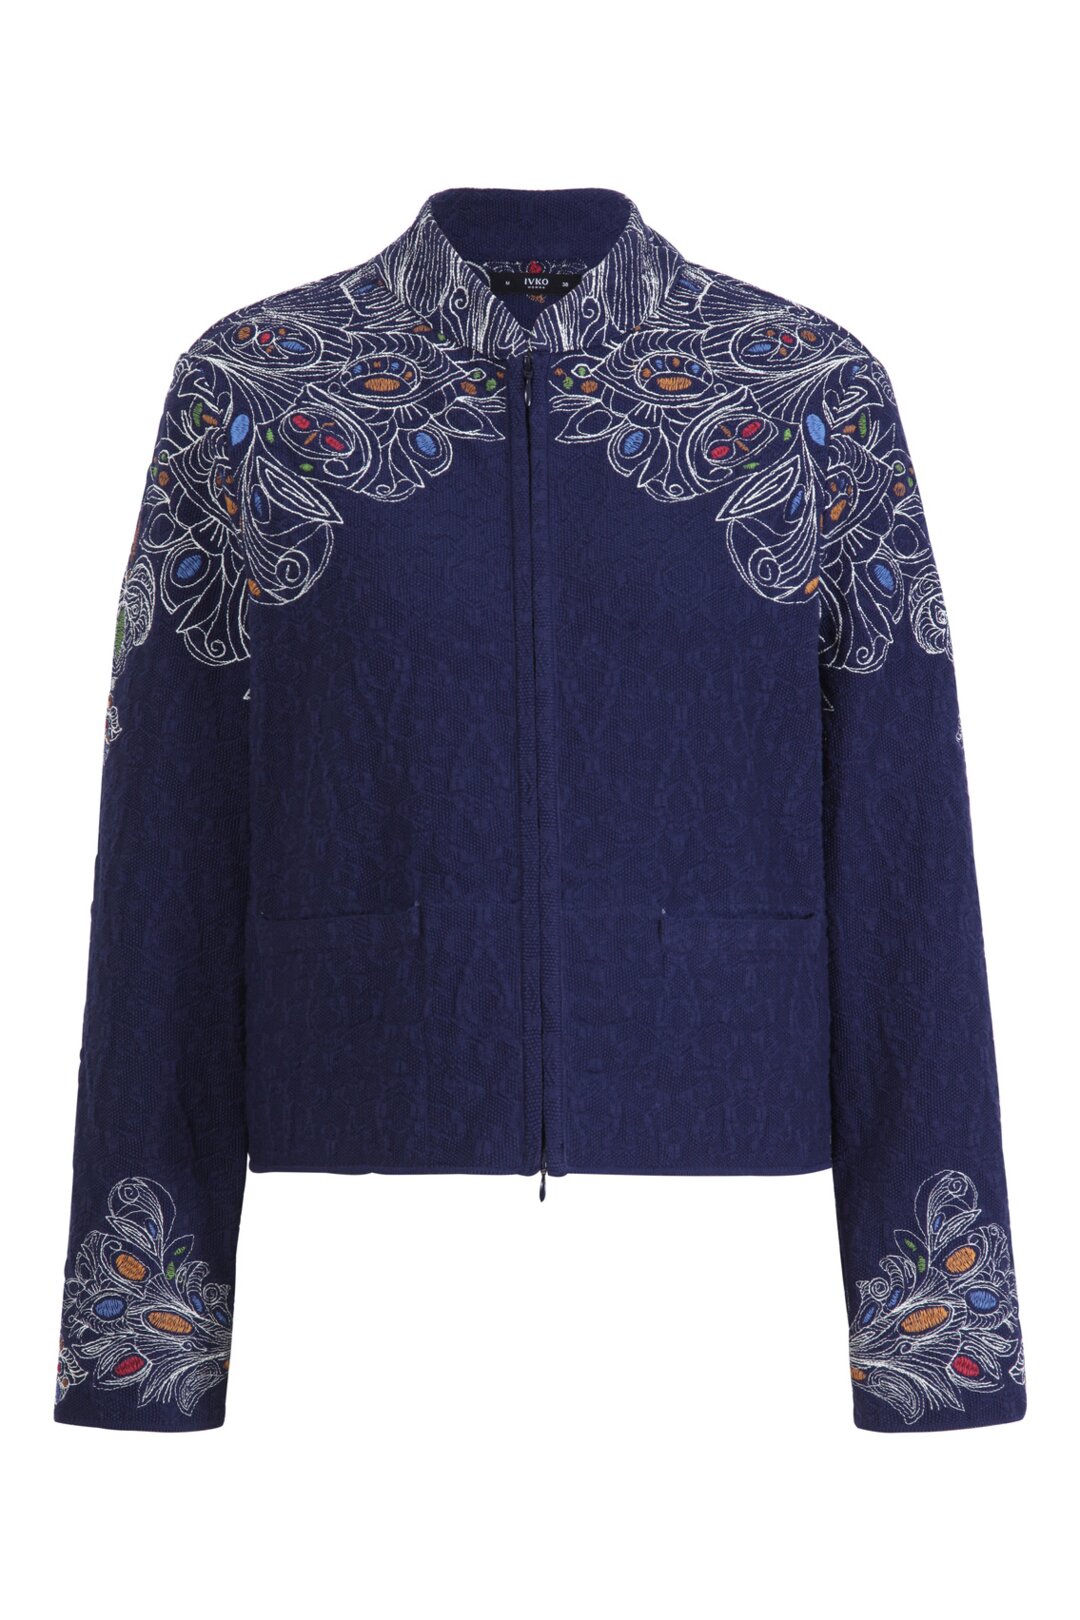 Embroidered Jacket, Neckless Pattern